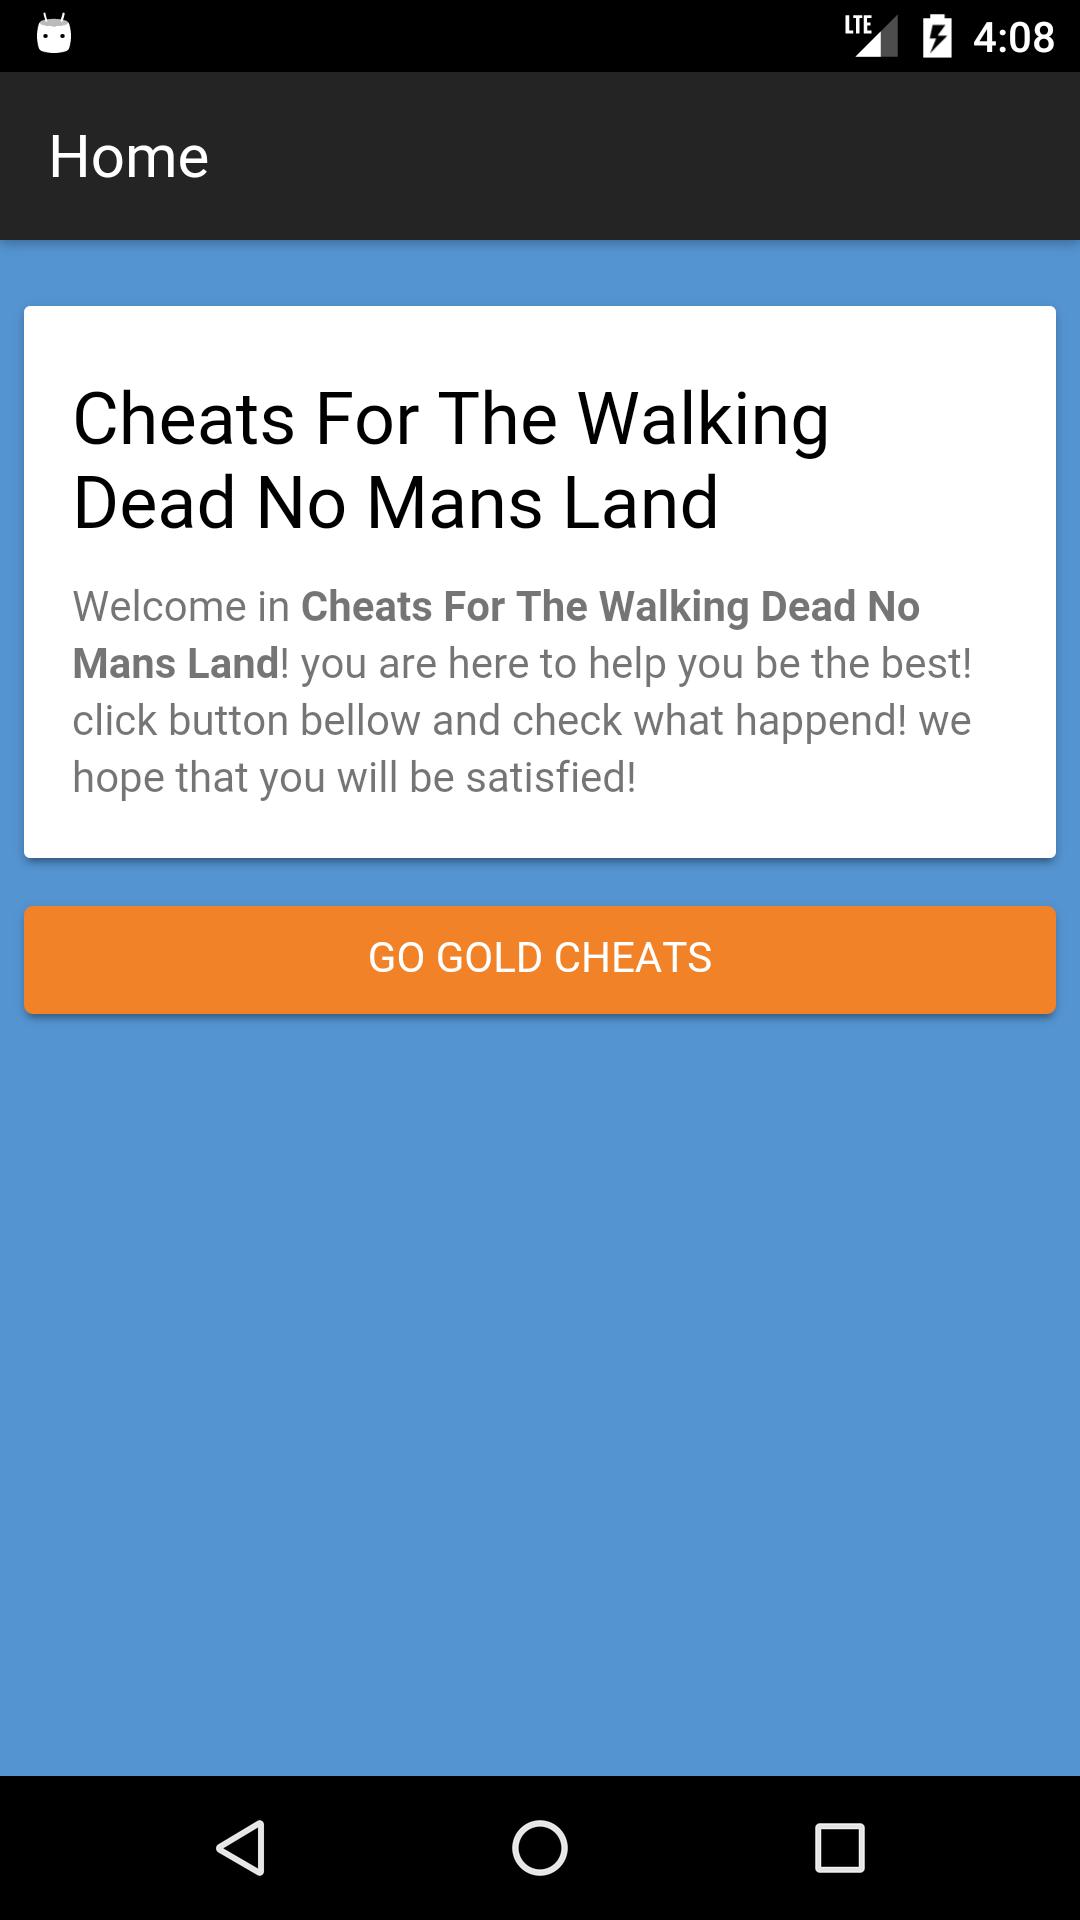 Cheats For The Walking Dead No Man's Land for Android - APK Download